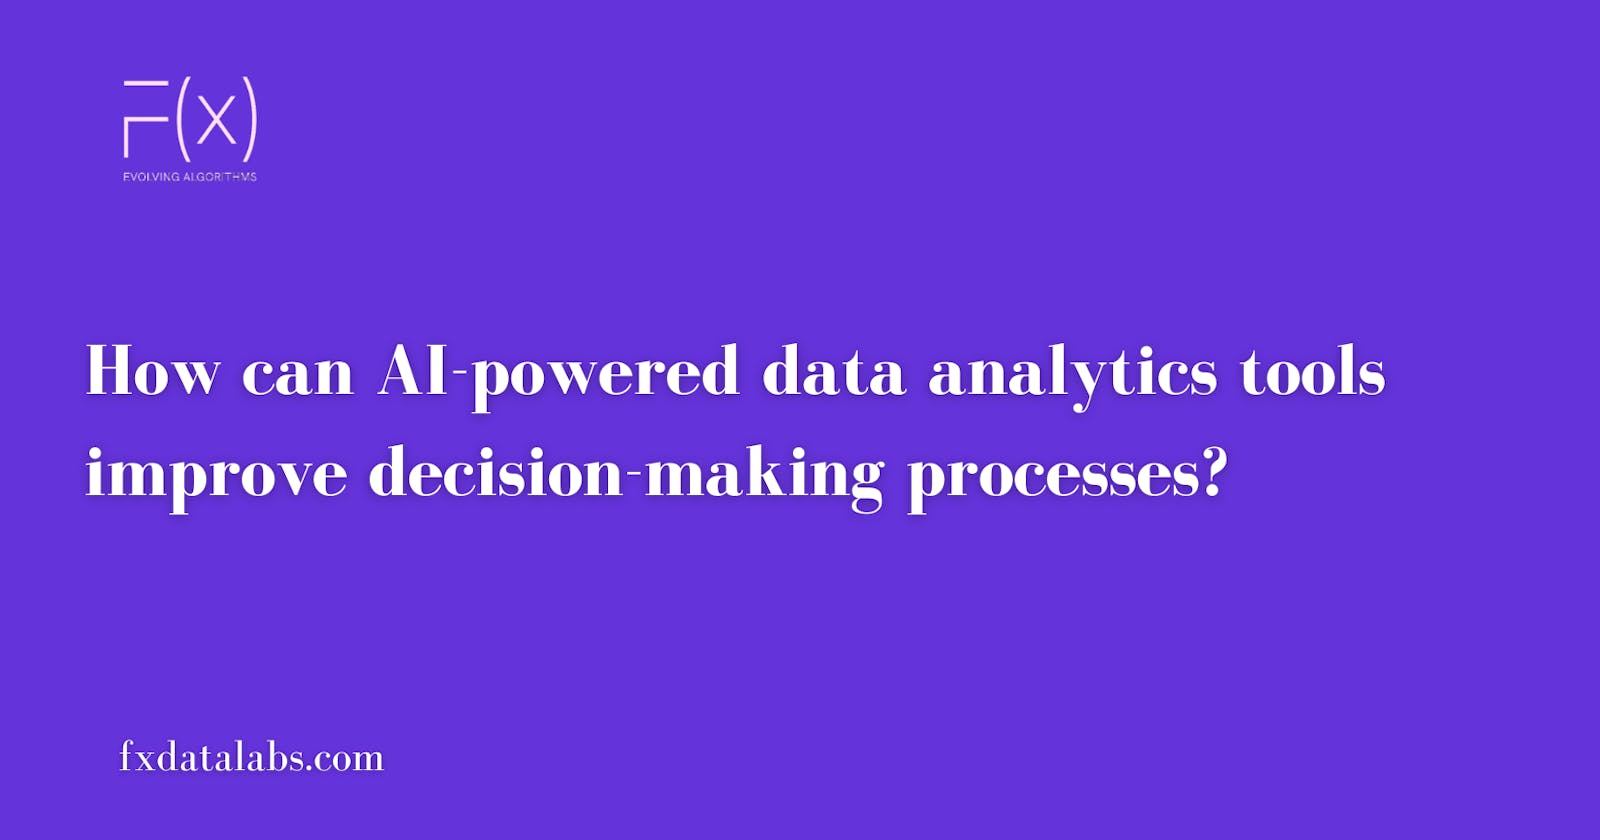 How can AI-powered data analytics tools improve decision-making processes?